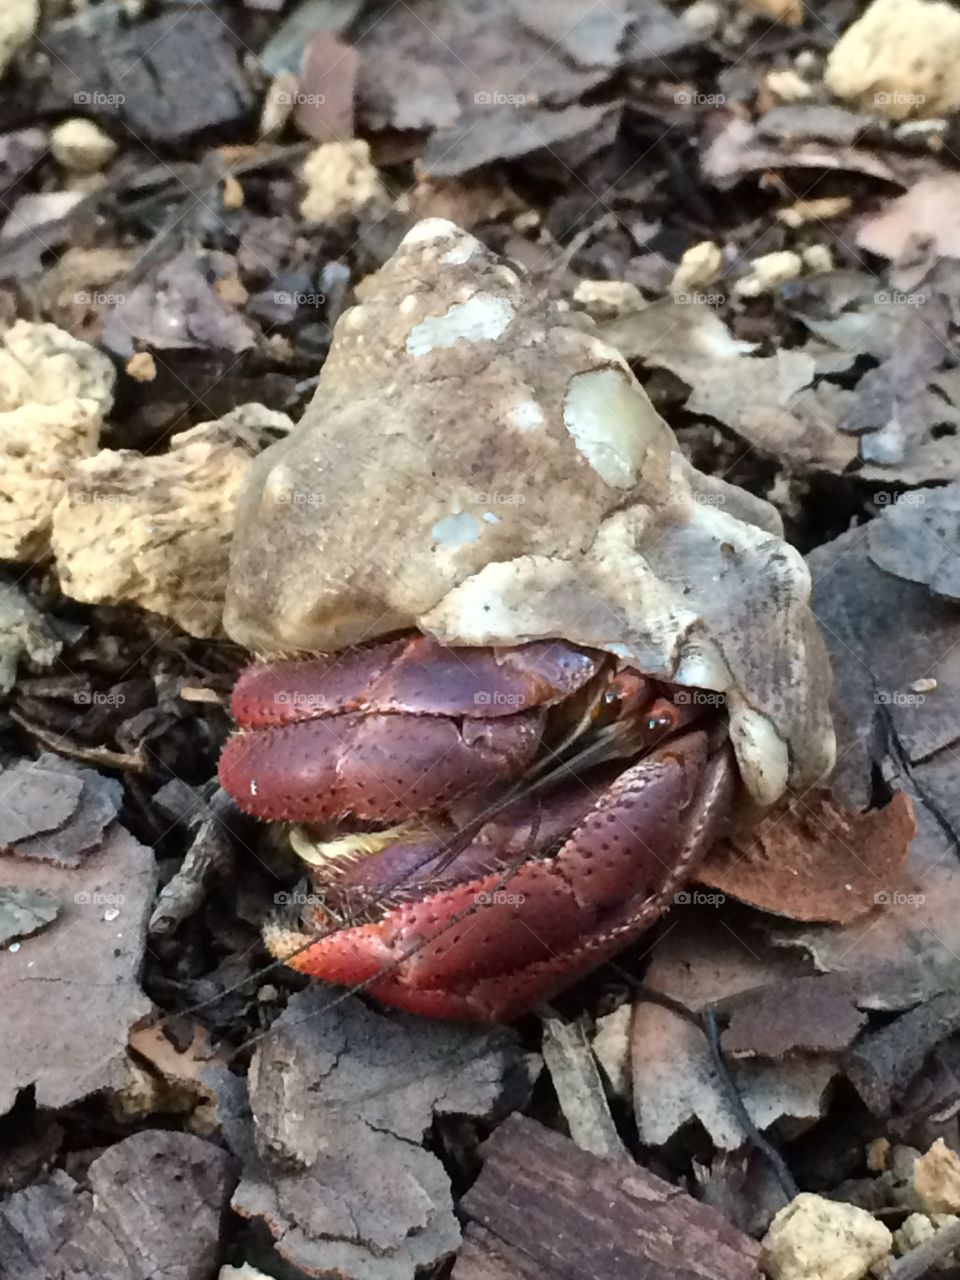 A hermit crab I found along a shrub land path. 

Fun fact- did you know all hermit crabs in the pet trade are wild caught! No one knows how to breed them.